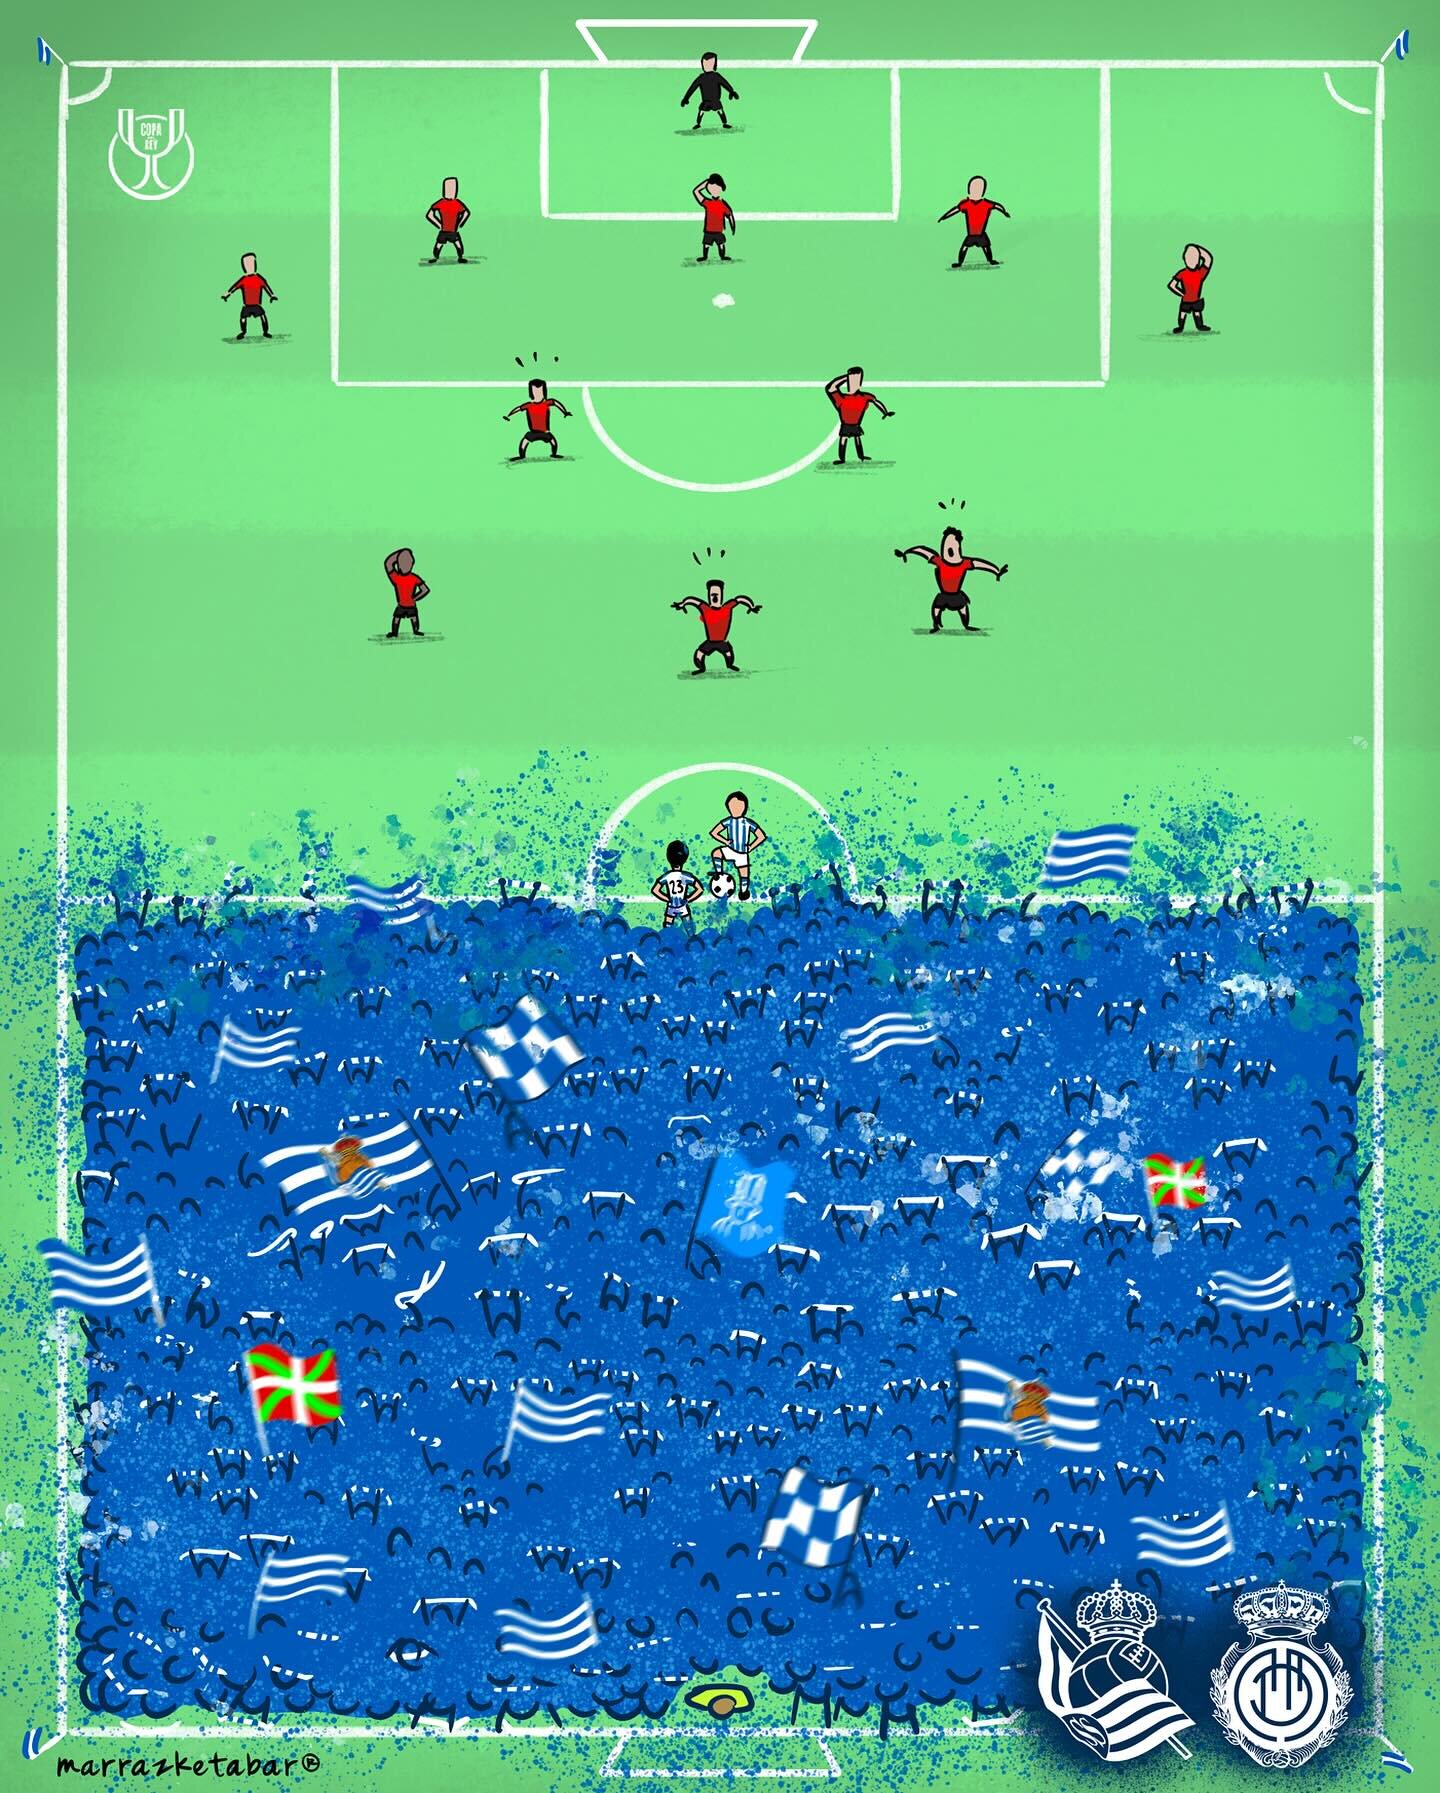 Amazing illustration by the home artist of Real Sociedad, @marrazketabar, ahead of the team&rsquo;s Copa del Rey match against Mallorca tomorrow

&ldquo;Tomorrow [all of] us are playing&rdquo; 👑🔵

#basque #sociedad #sansebastian